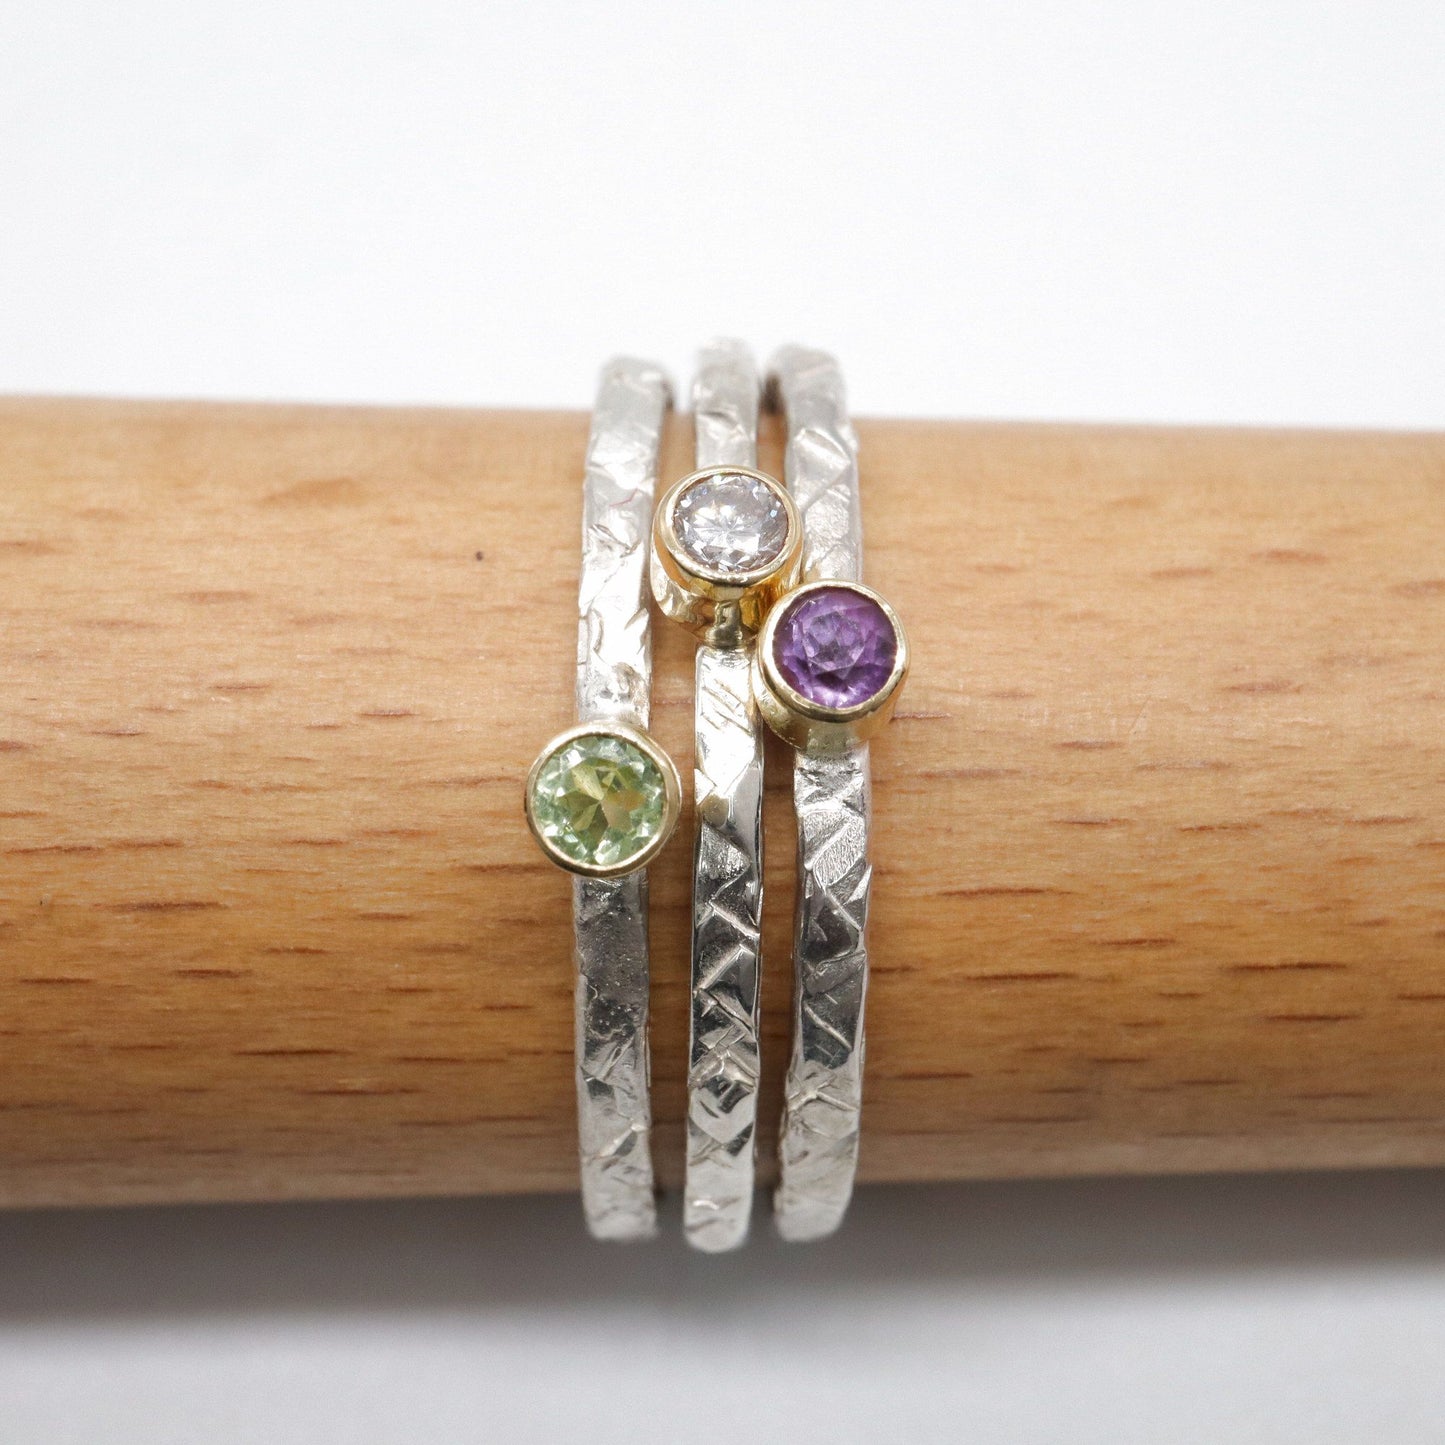 Stacking ring set of three with amethyst, diamond and peridot, Striding Edge design in 18ct yellow gold and silver.